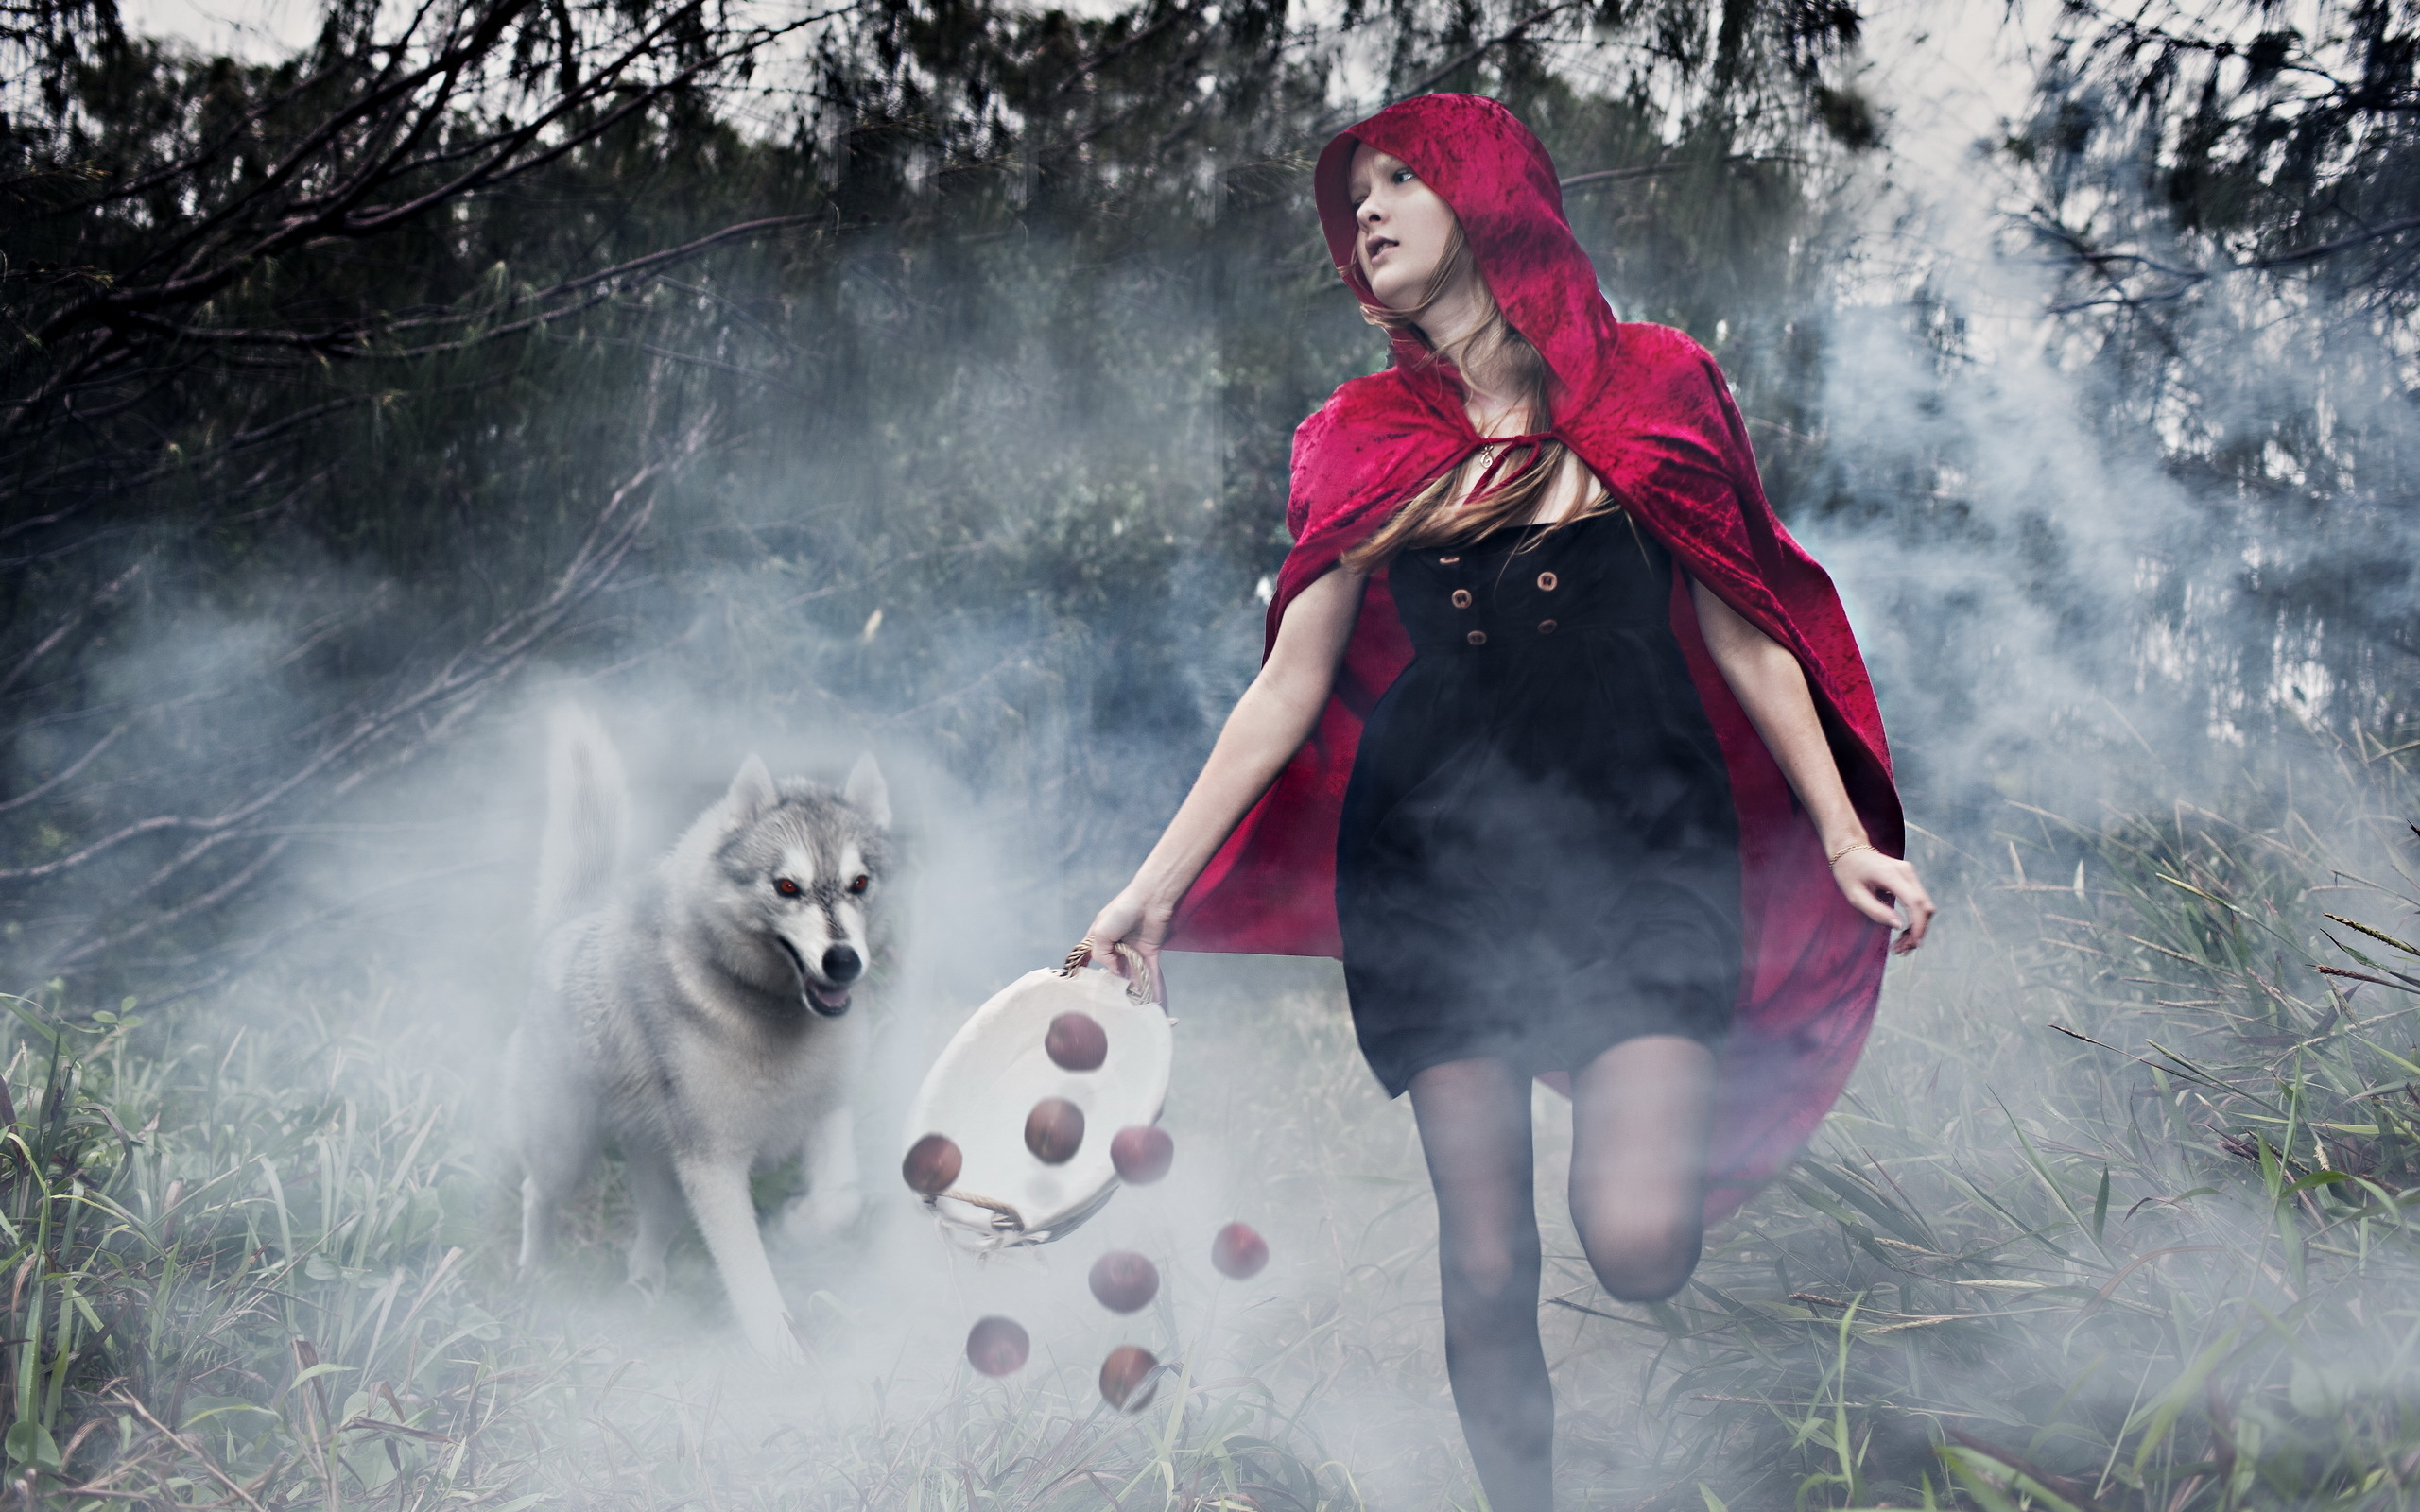 Woman Photography Girl Model Dog Fog Gothic Red Riding Hood 2560x1600